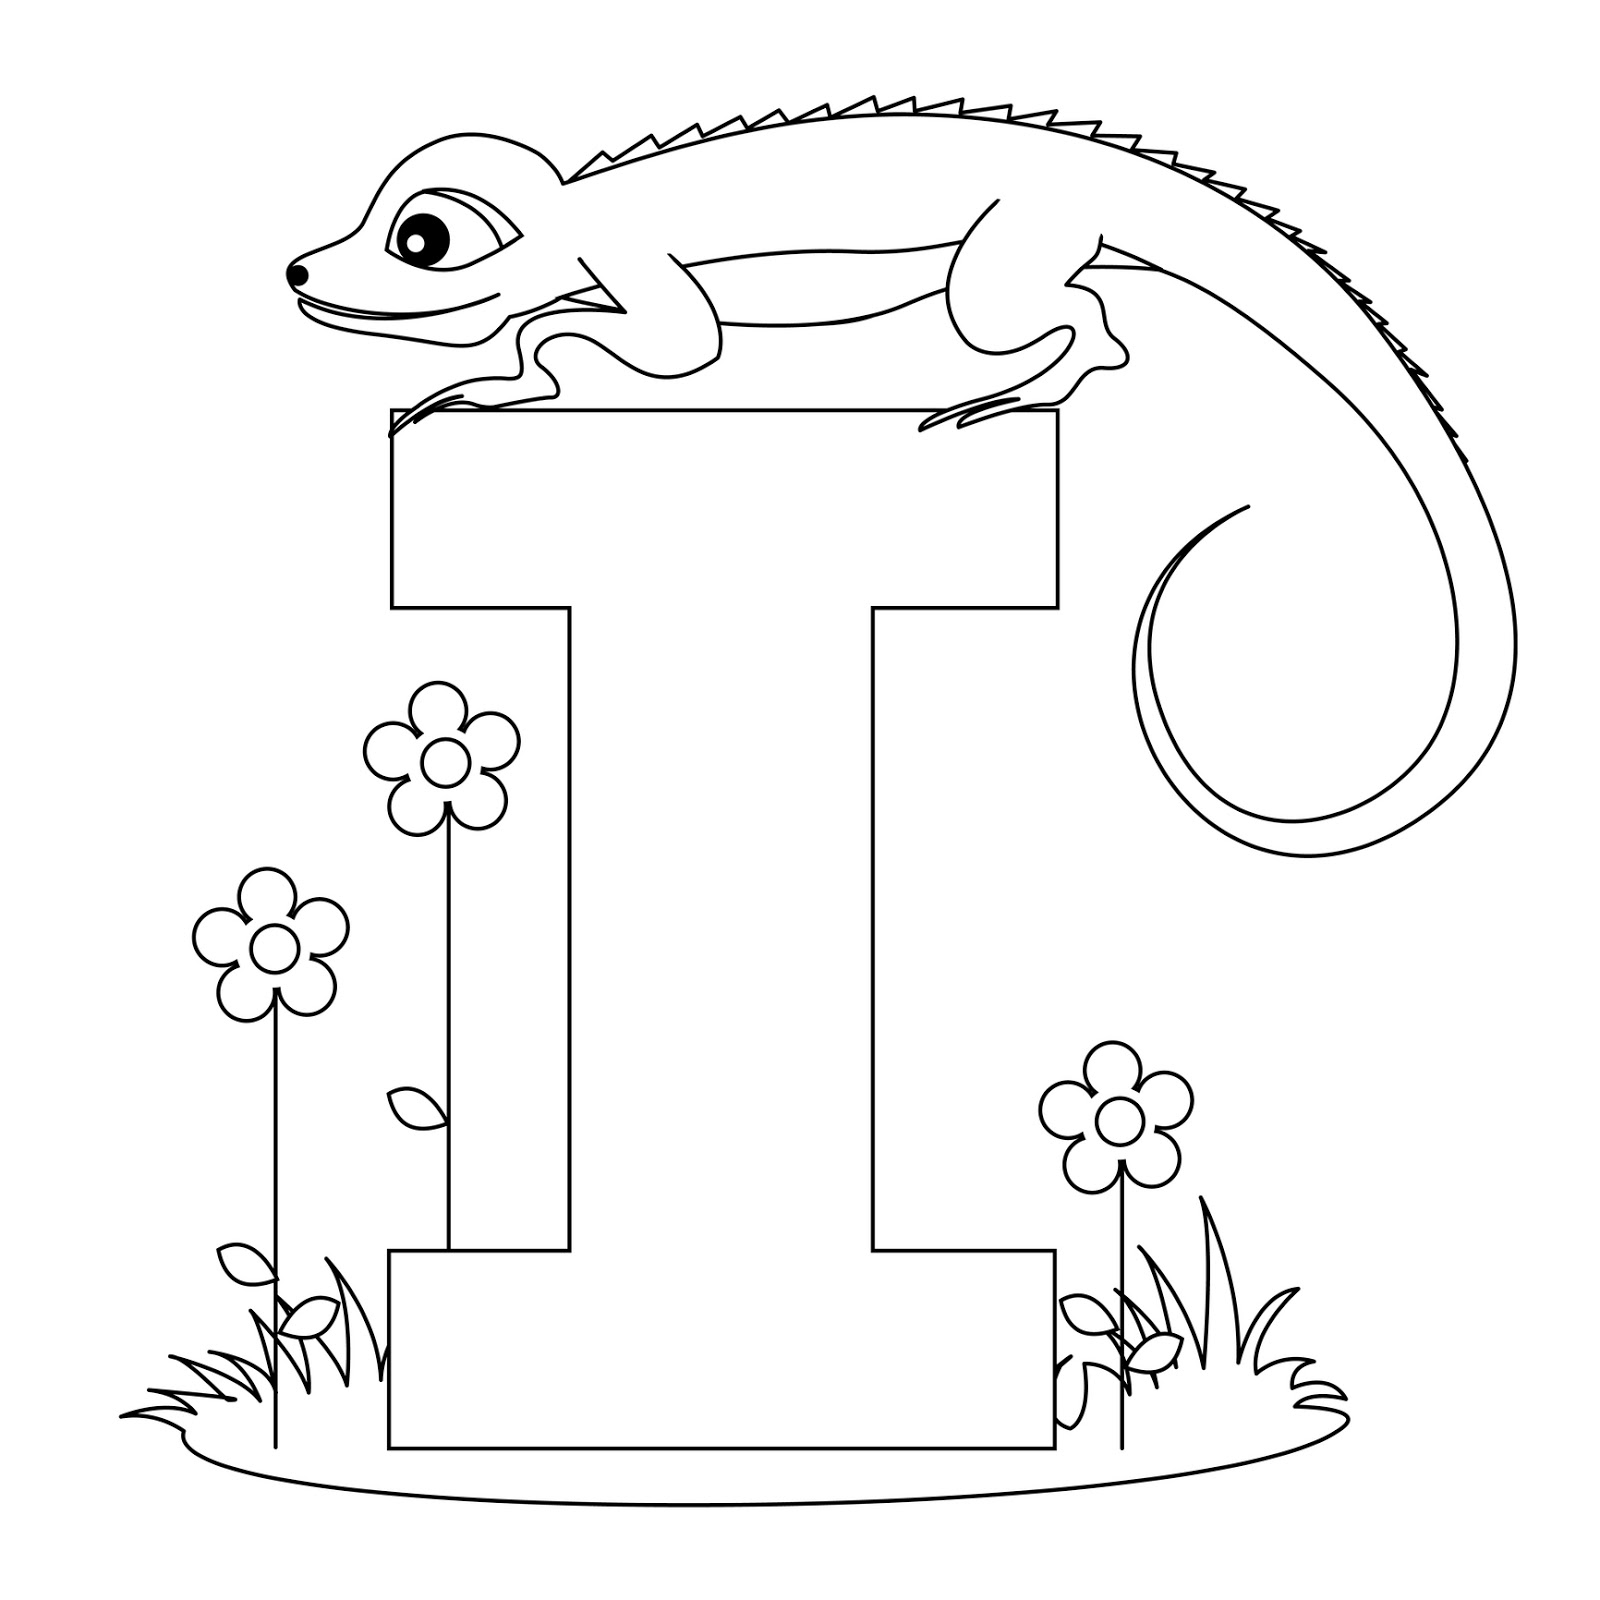 Animal Alphabet Letter I Coloring Pages